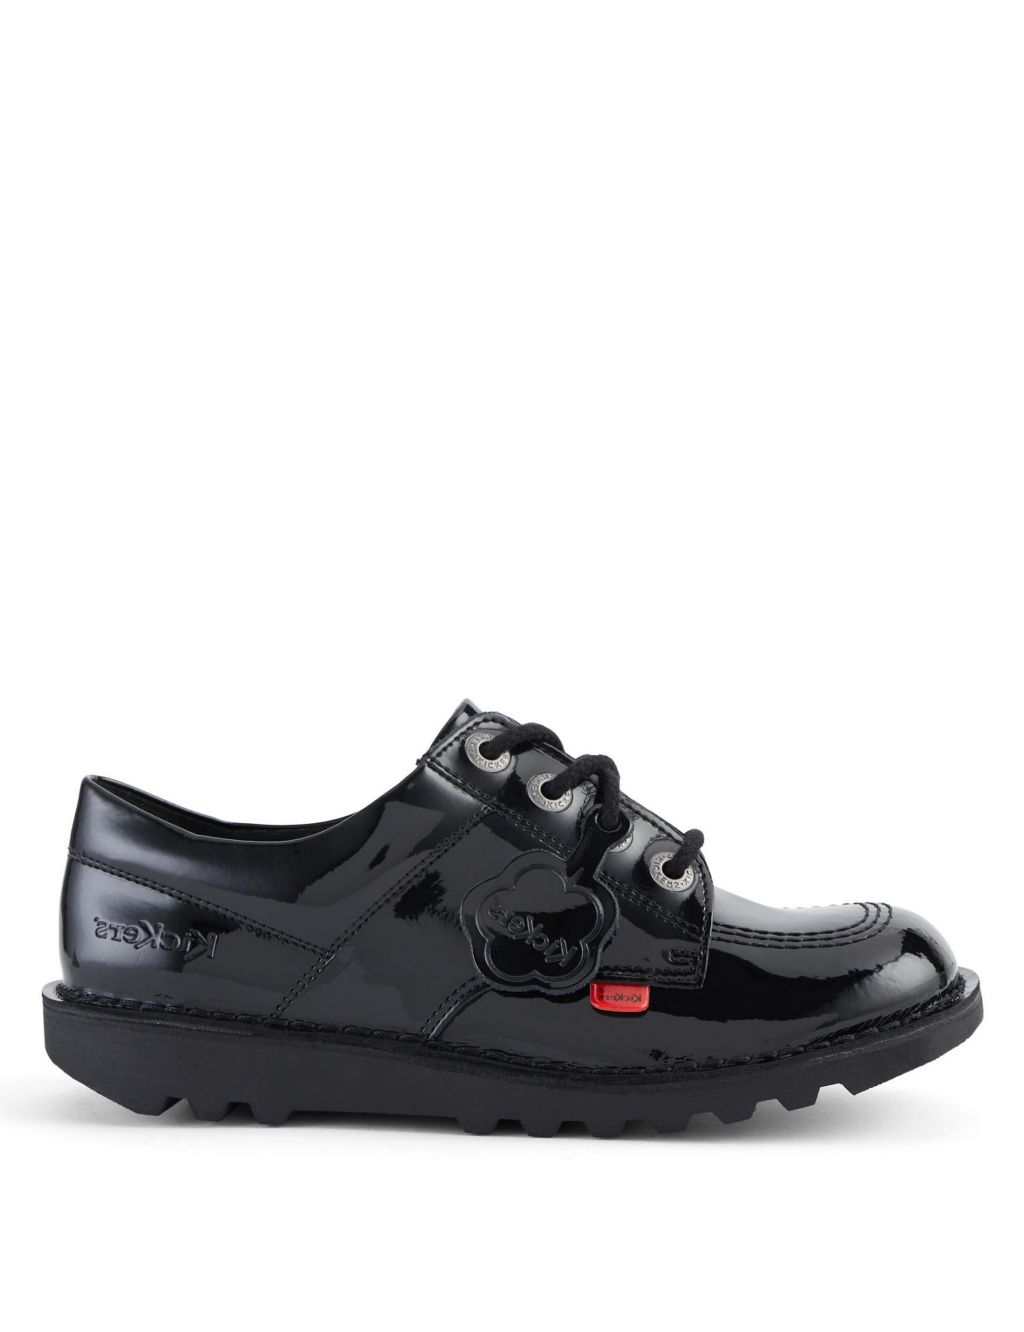 Kids' Patent Leather Lace School Shoes image 1